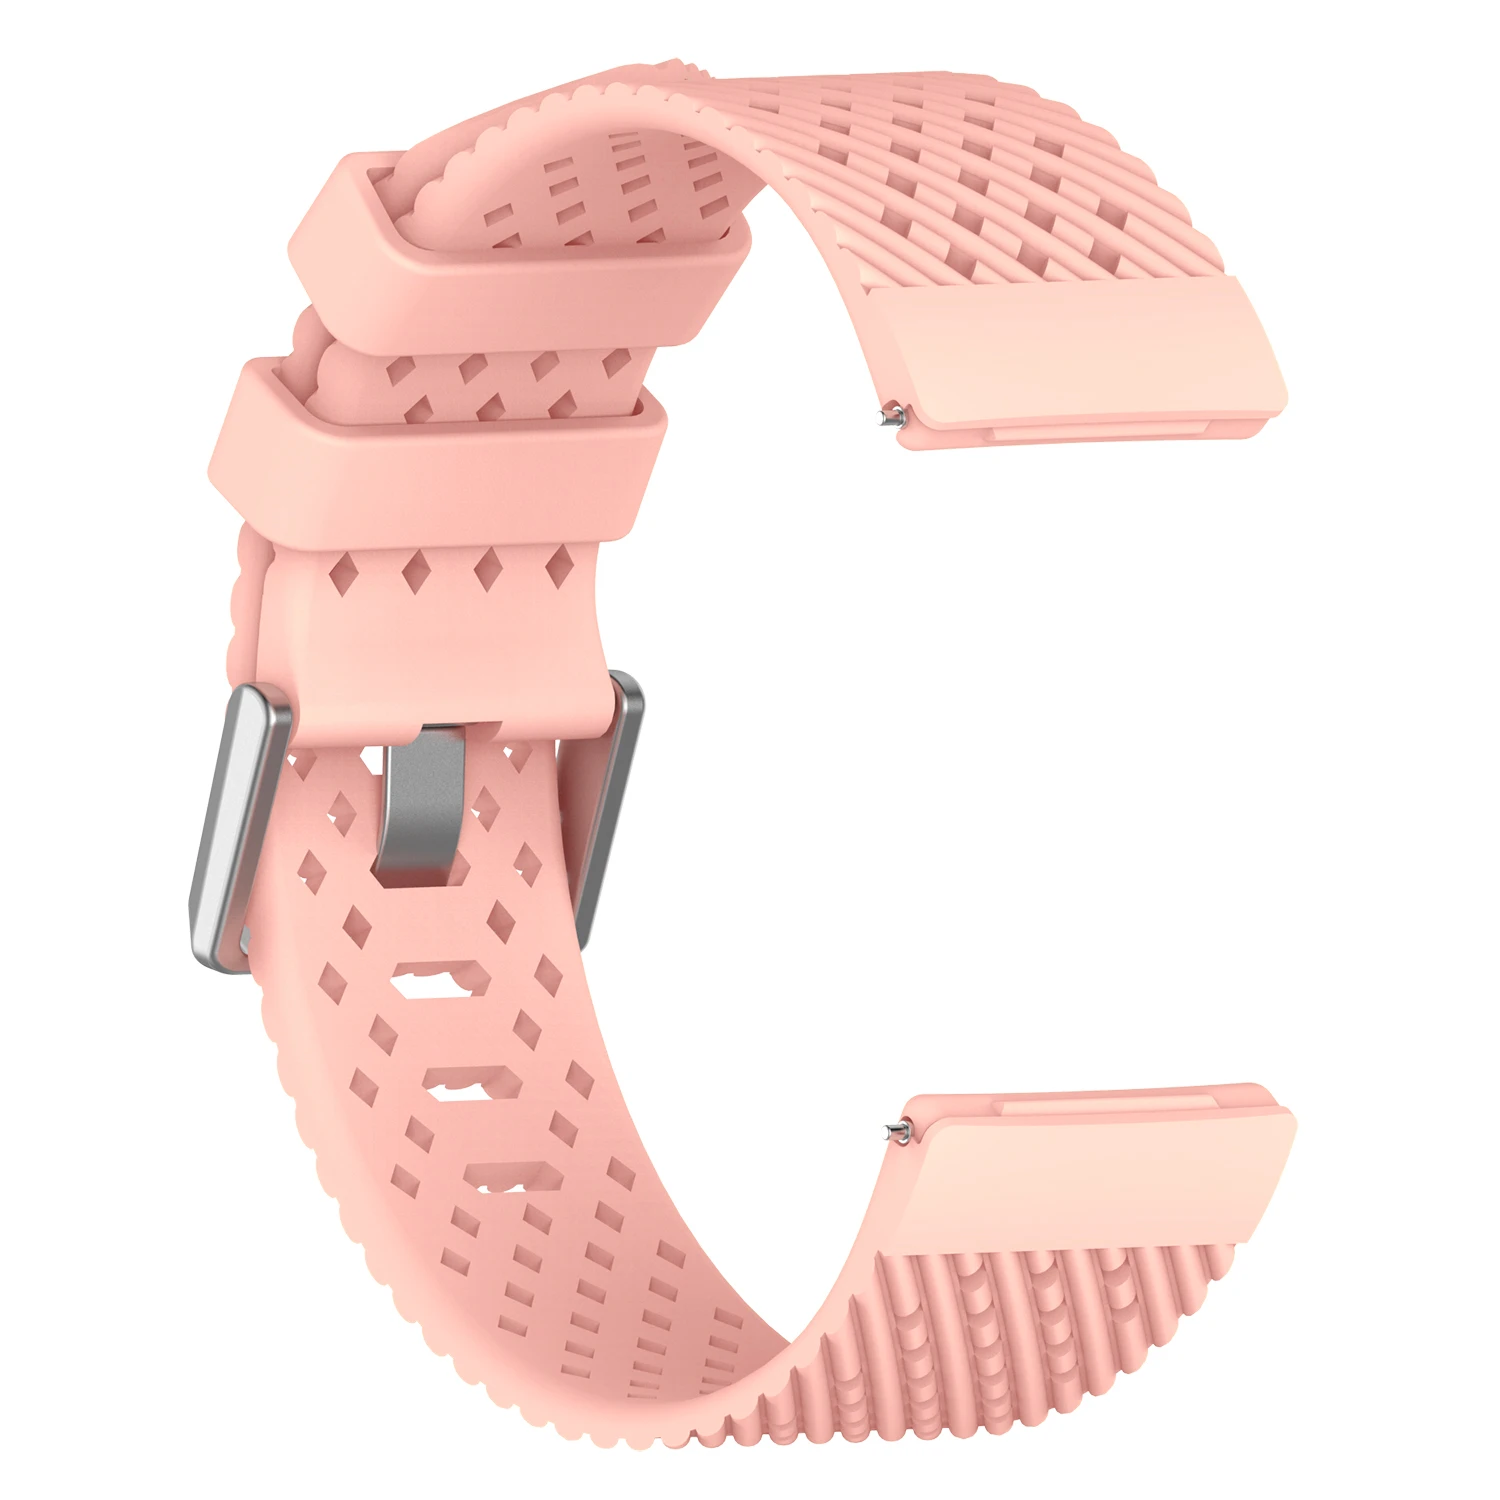 Soft Silicone For Fitbit Versa Bracelet Replacement Sport Wristband Watch Band Accessories Strap Watchband For Fitbit versa lite